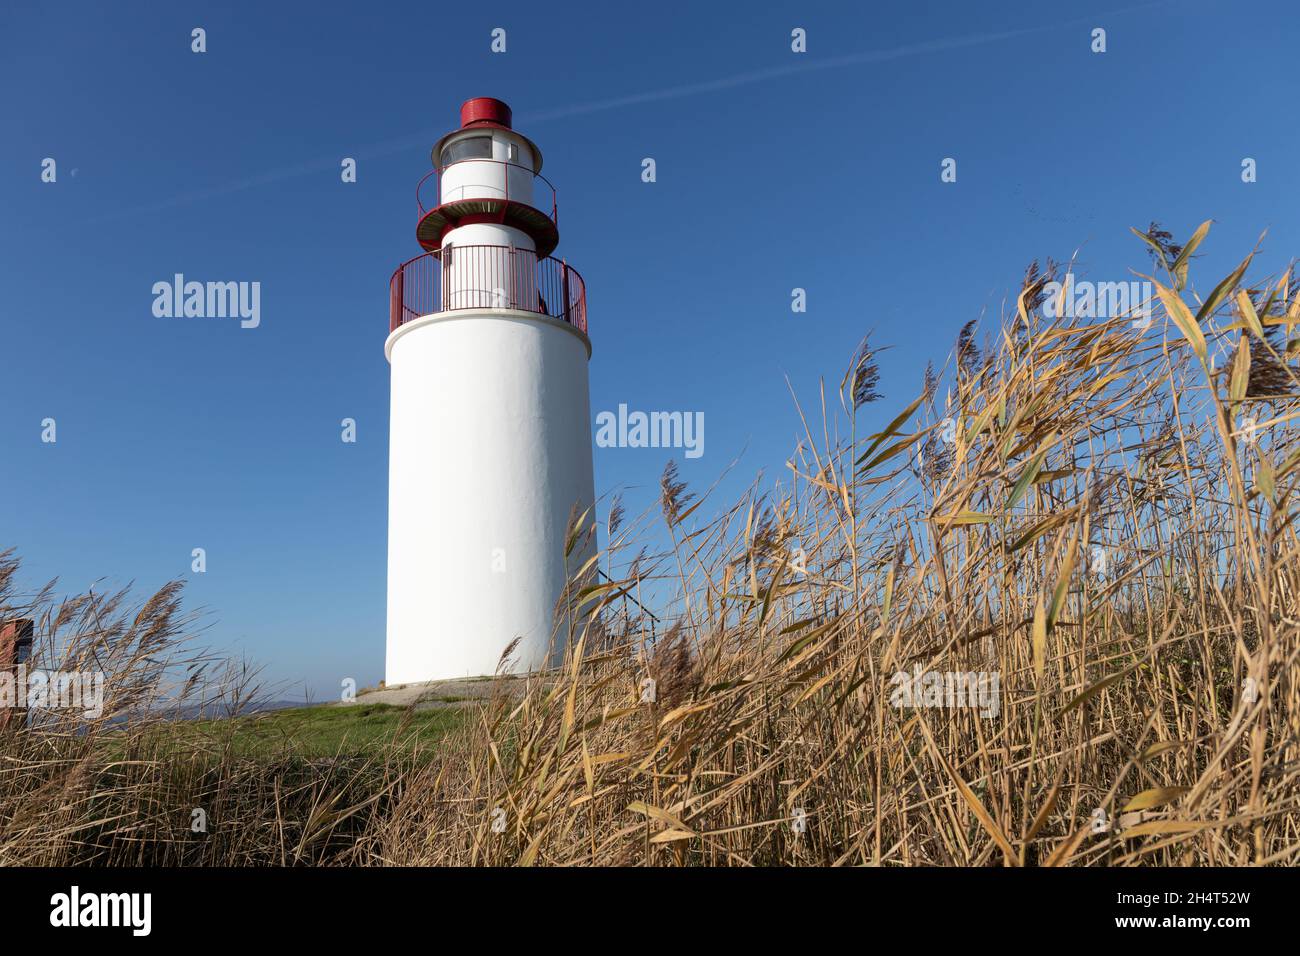 Page 2 - Vejle High Resolution Stock Photography and Images - Alamy